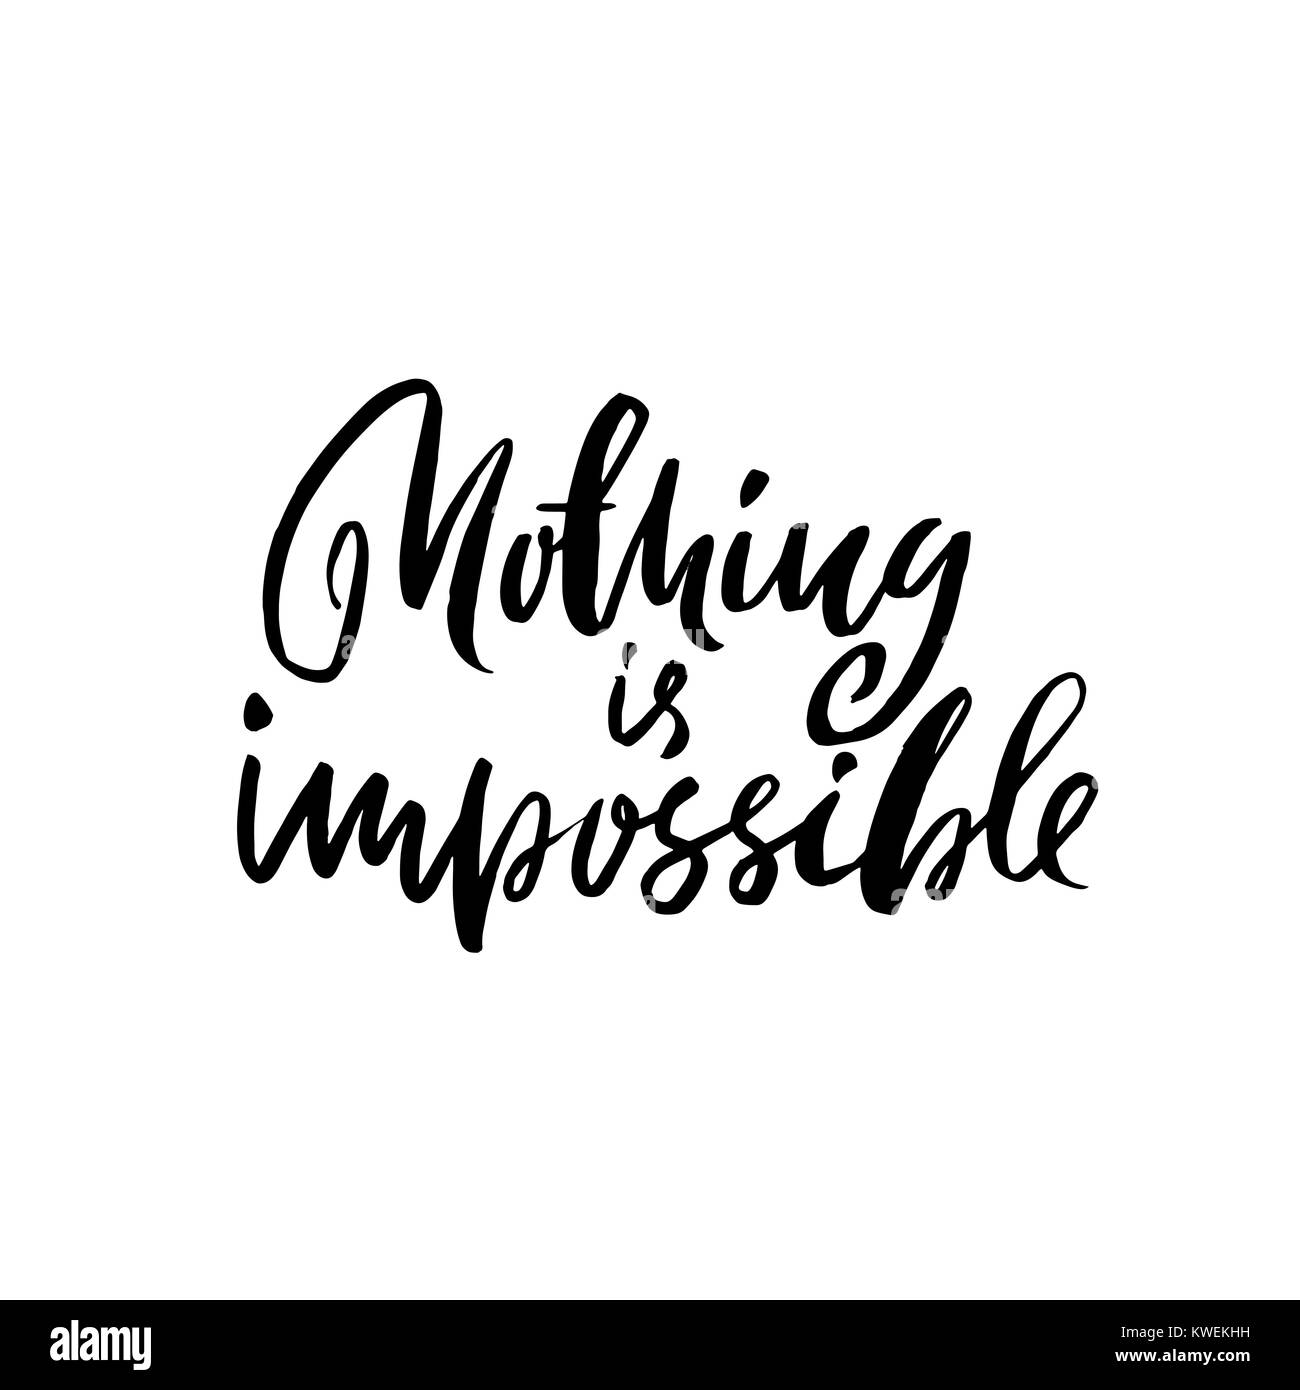 Nothing is impossible. Hand drawn dry brush lettering. Ink illustration. Modern calligraphy phrase. Vector illustration. Stock Vector